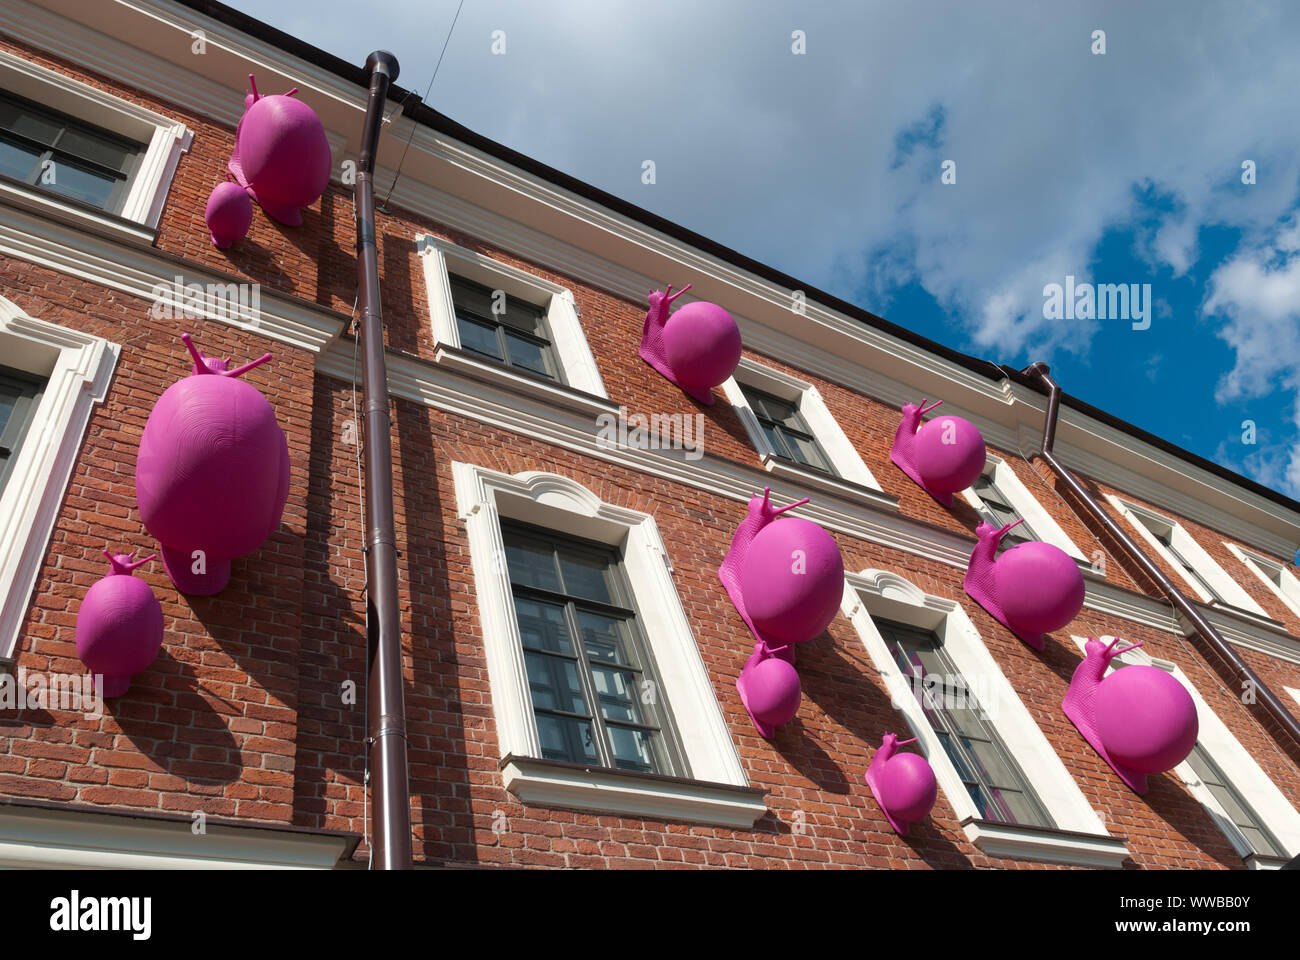 SAINT-PETERSBURG, RUSSIA – JULY 7, 2019: New Holland Island.The pink snails on the wall by Cracking Art Stock Photo